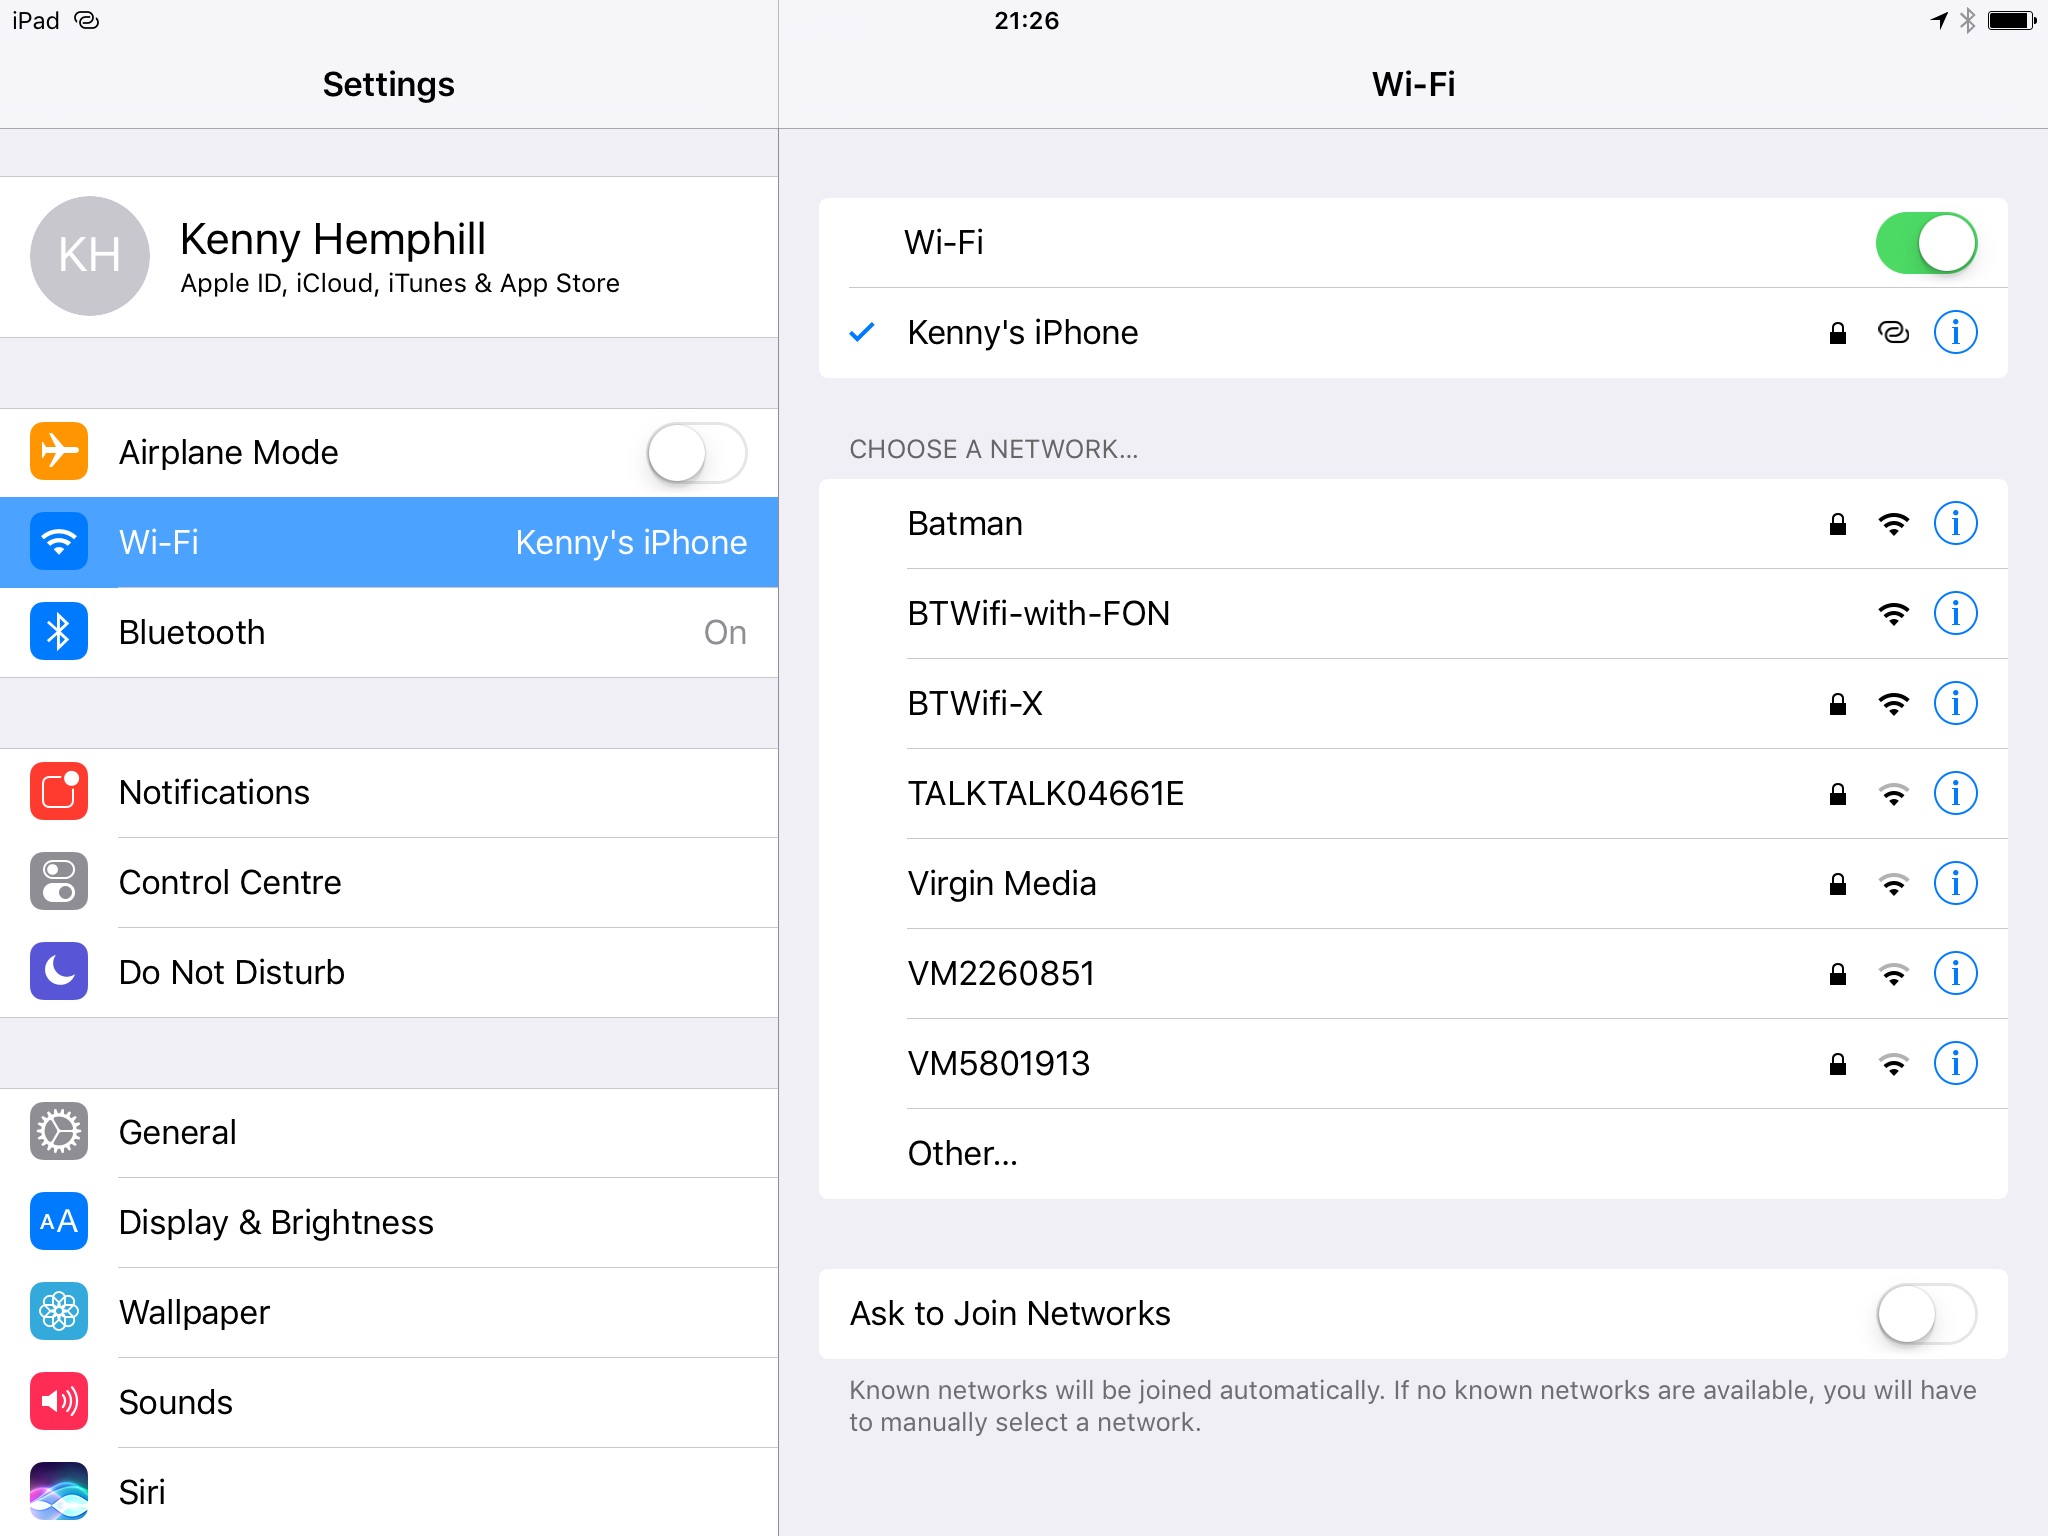 How To Use Your IPhone’s Internet On Your IPad